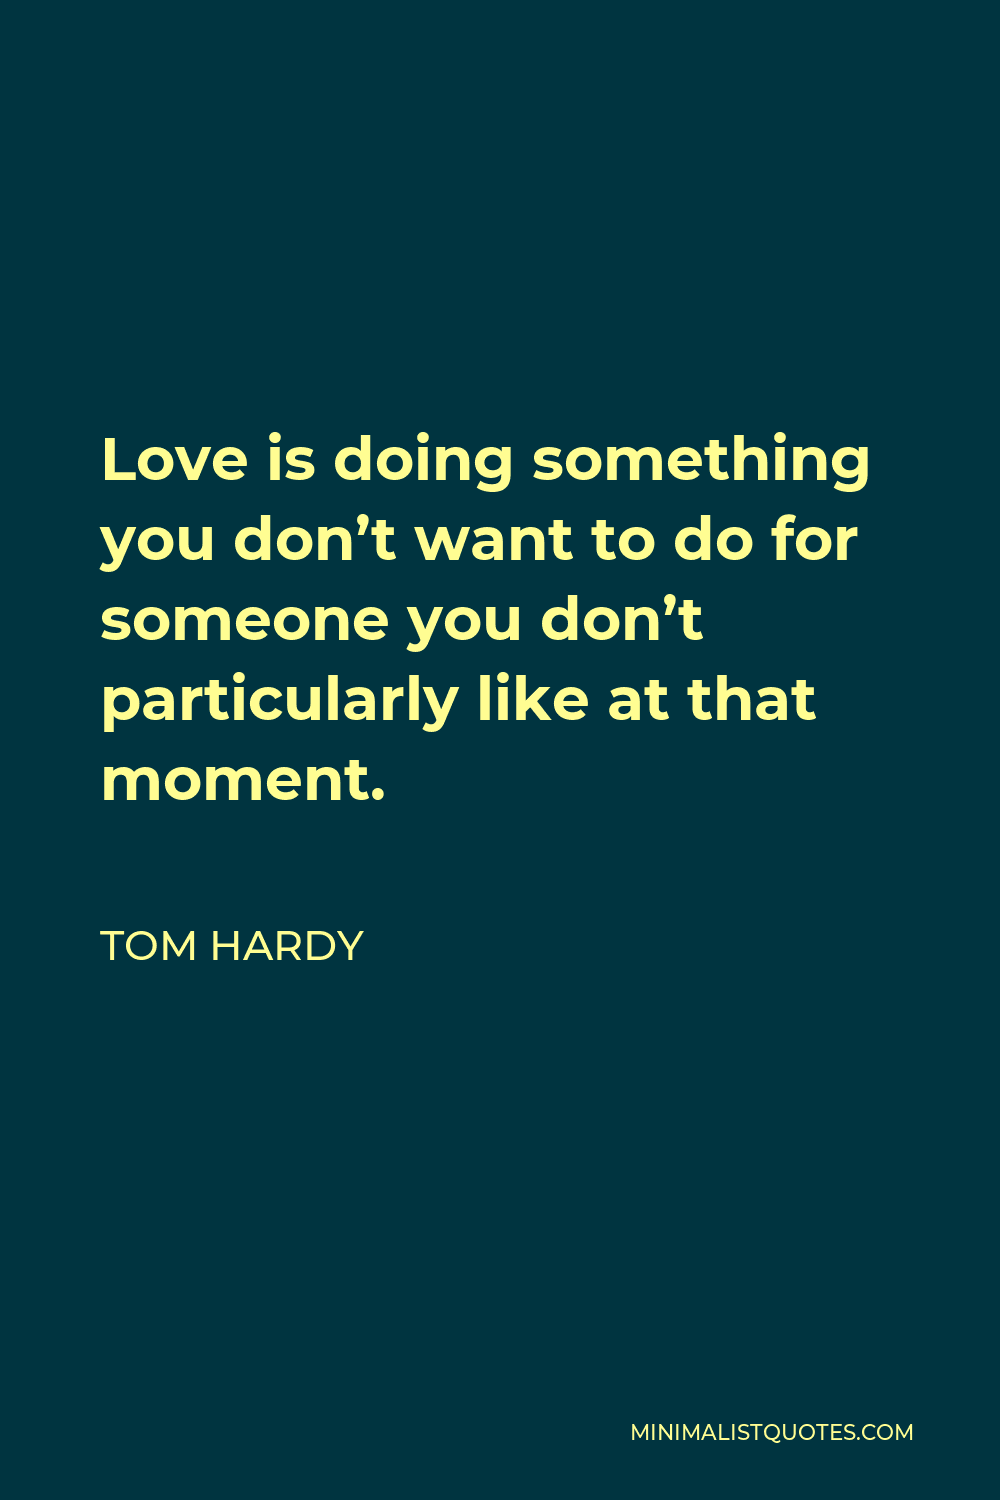 Tom Hardy Quote - Love is doing something you don’t want to do for someone you don’t particularly like at that moment.